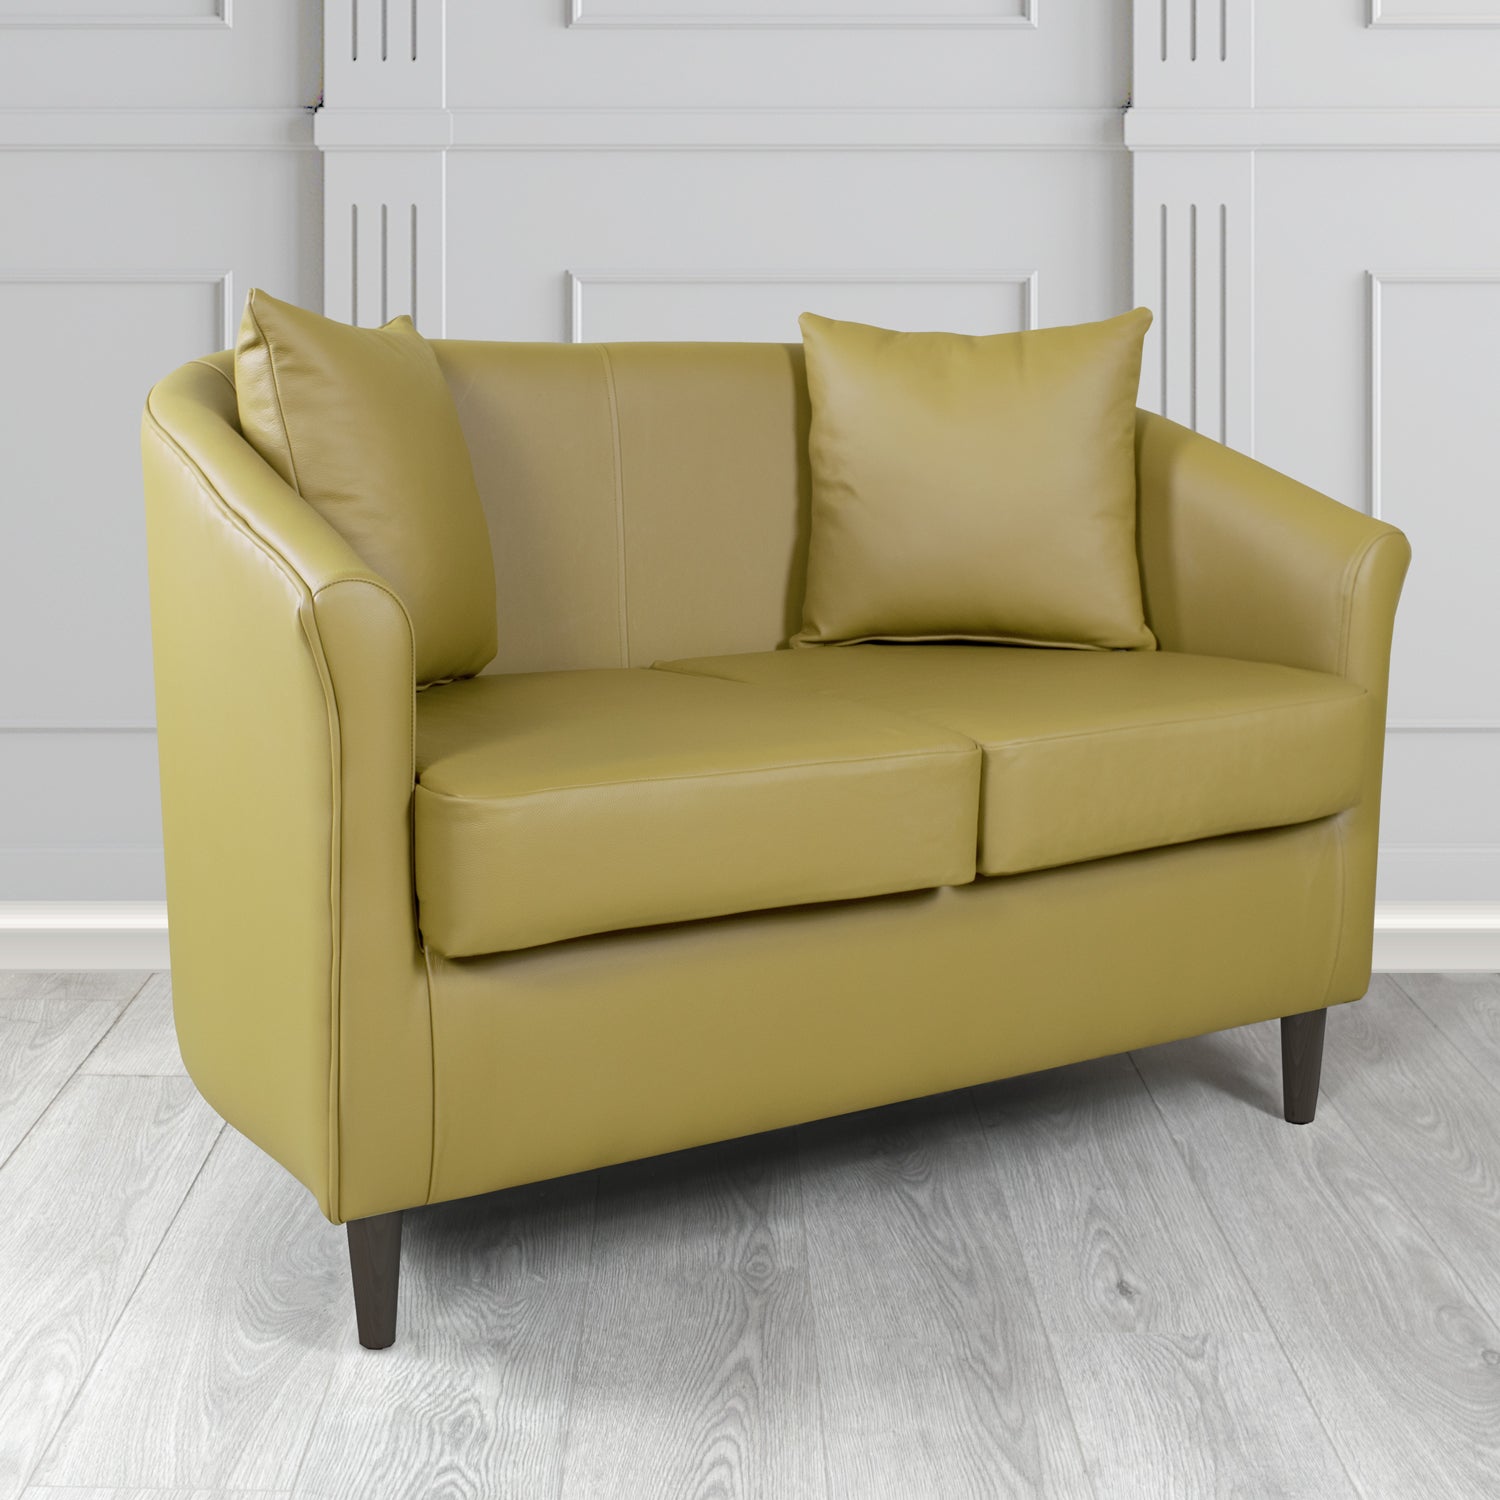 St Tropez Shelly Golders Green Crib 5 Genuine Leather 2 Seater Tub Sofa with Scatter Cushions - The Tub Chair Shop